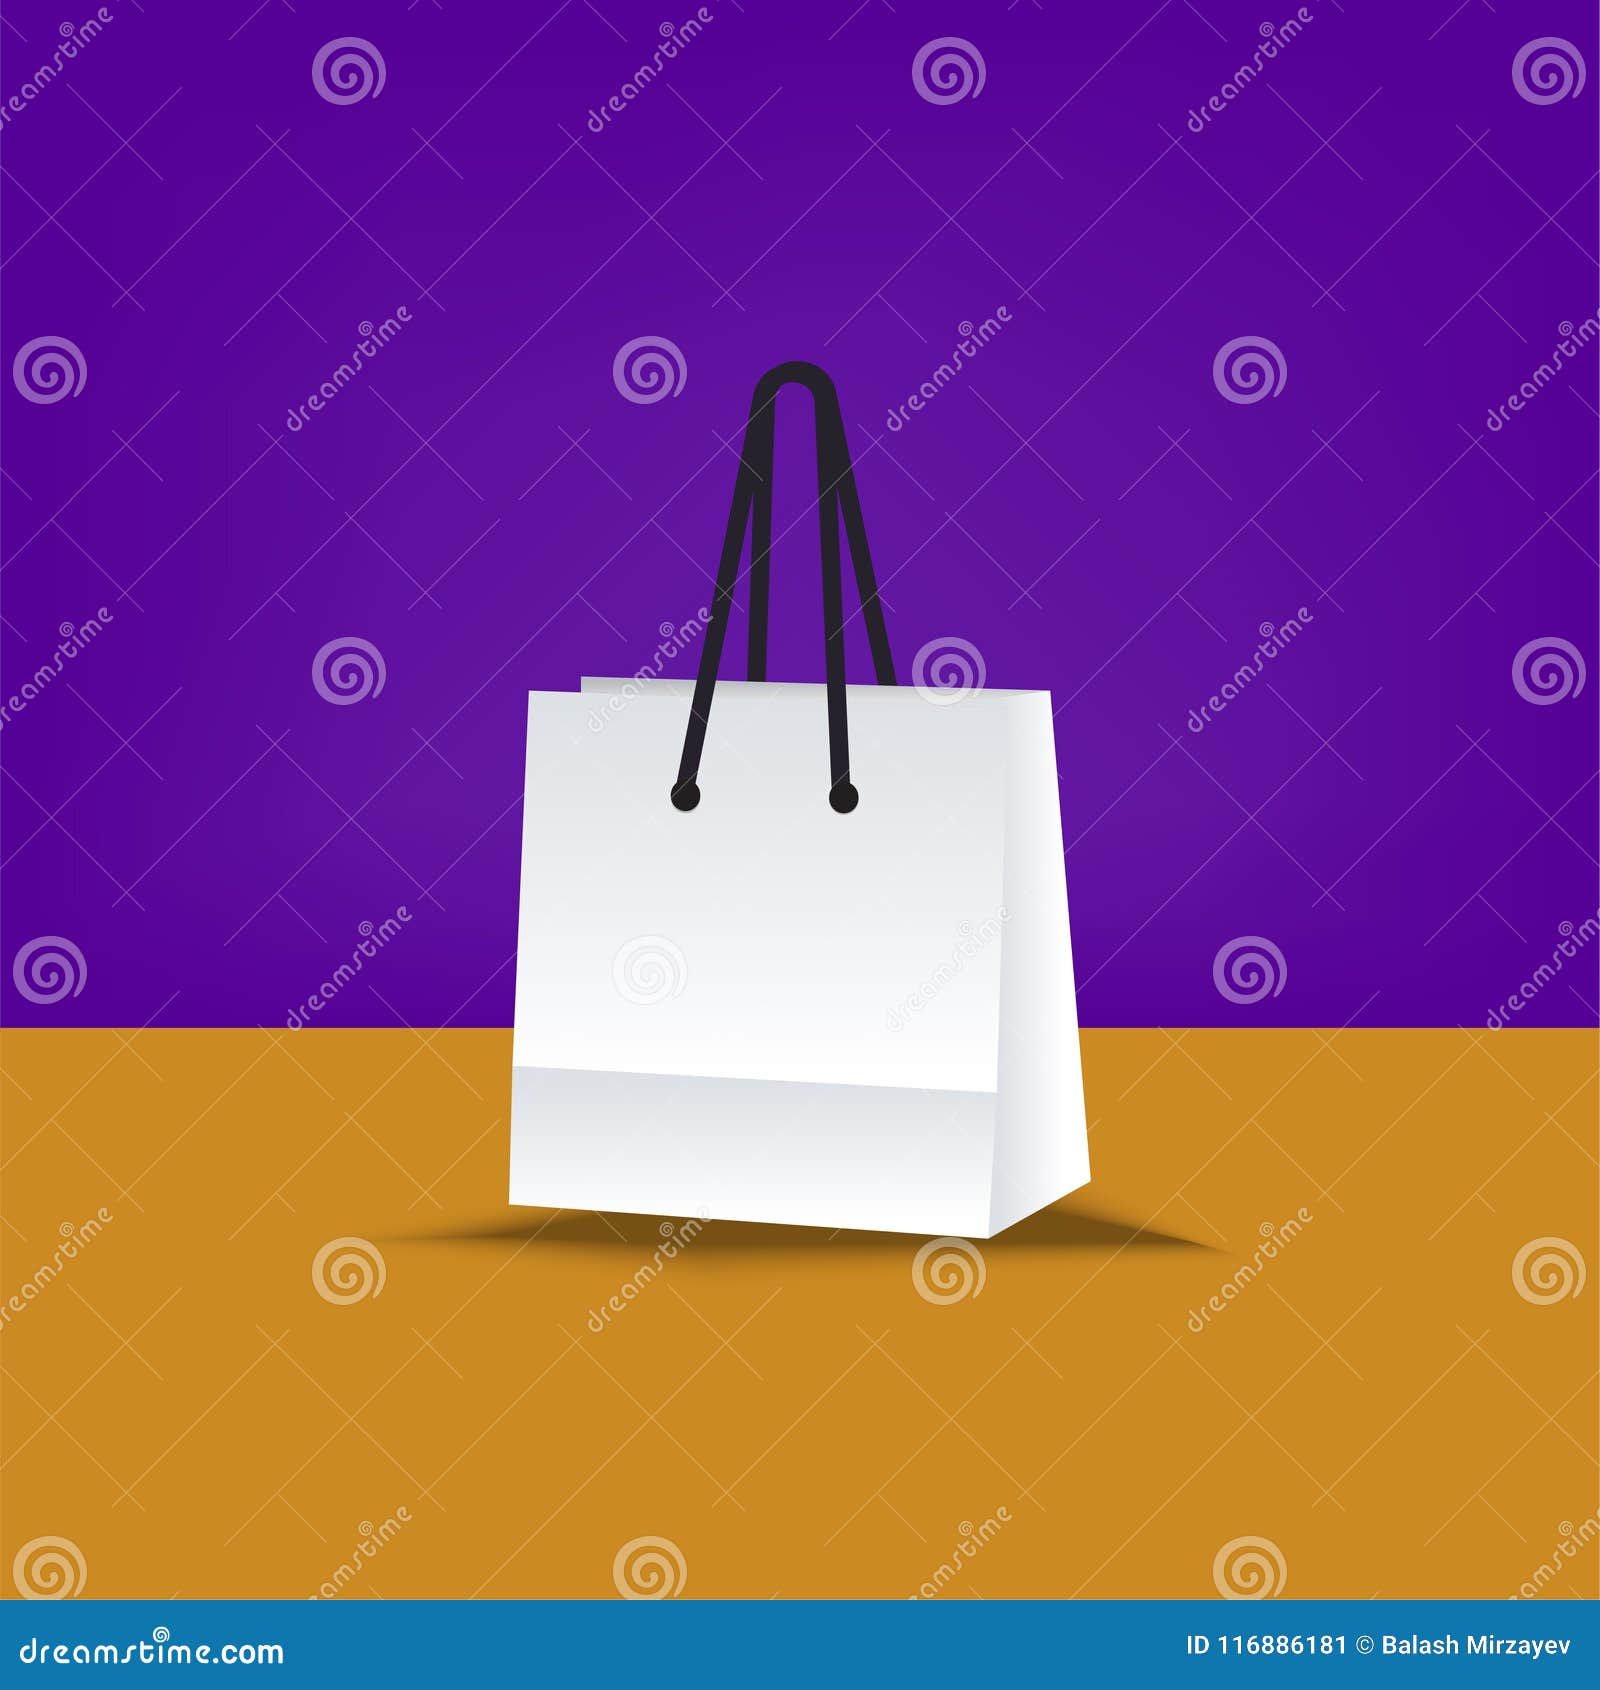 Download Realistic Paper Bag Mock Up Template. Empty Shopping Bag ...